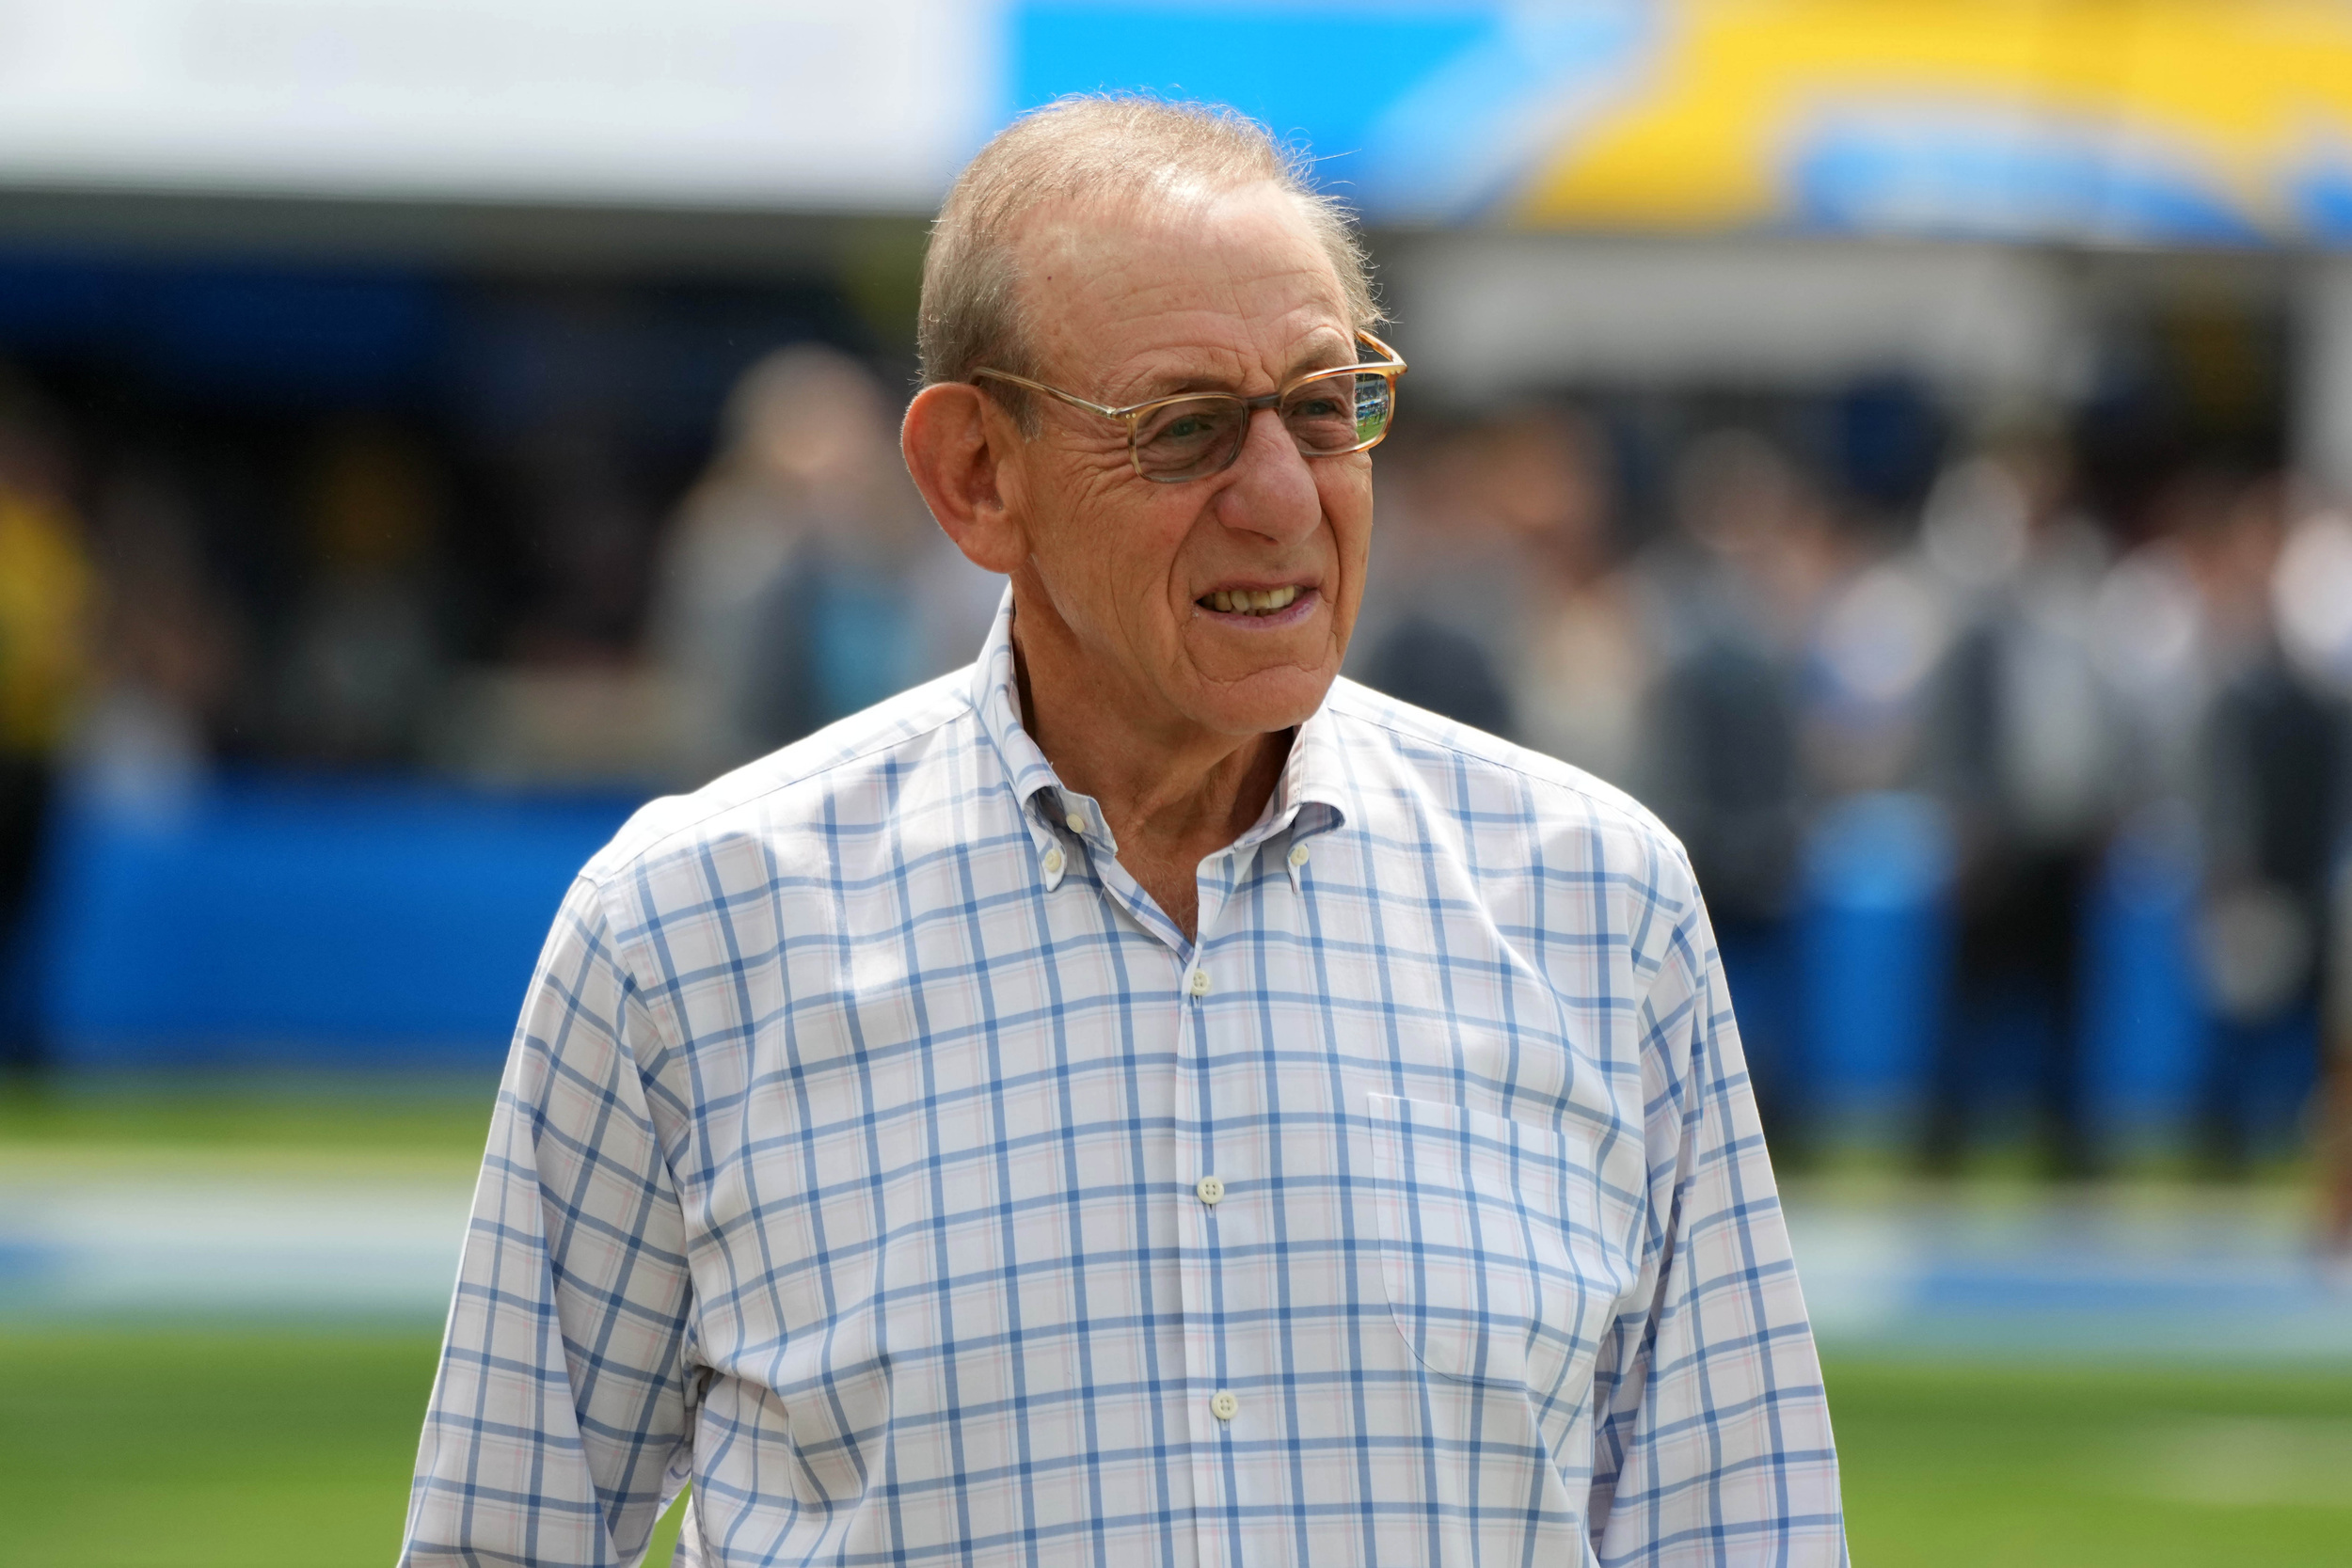 dolphins owner turns down multibillion-dollar offer for control of team